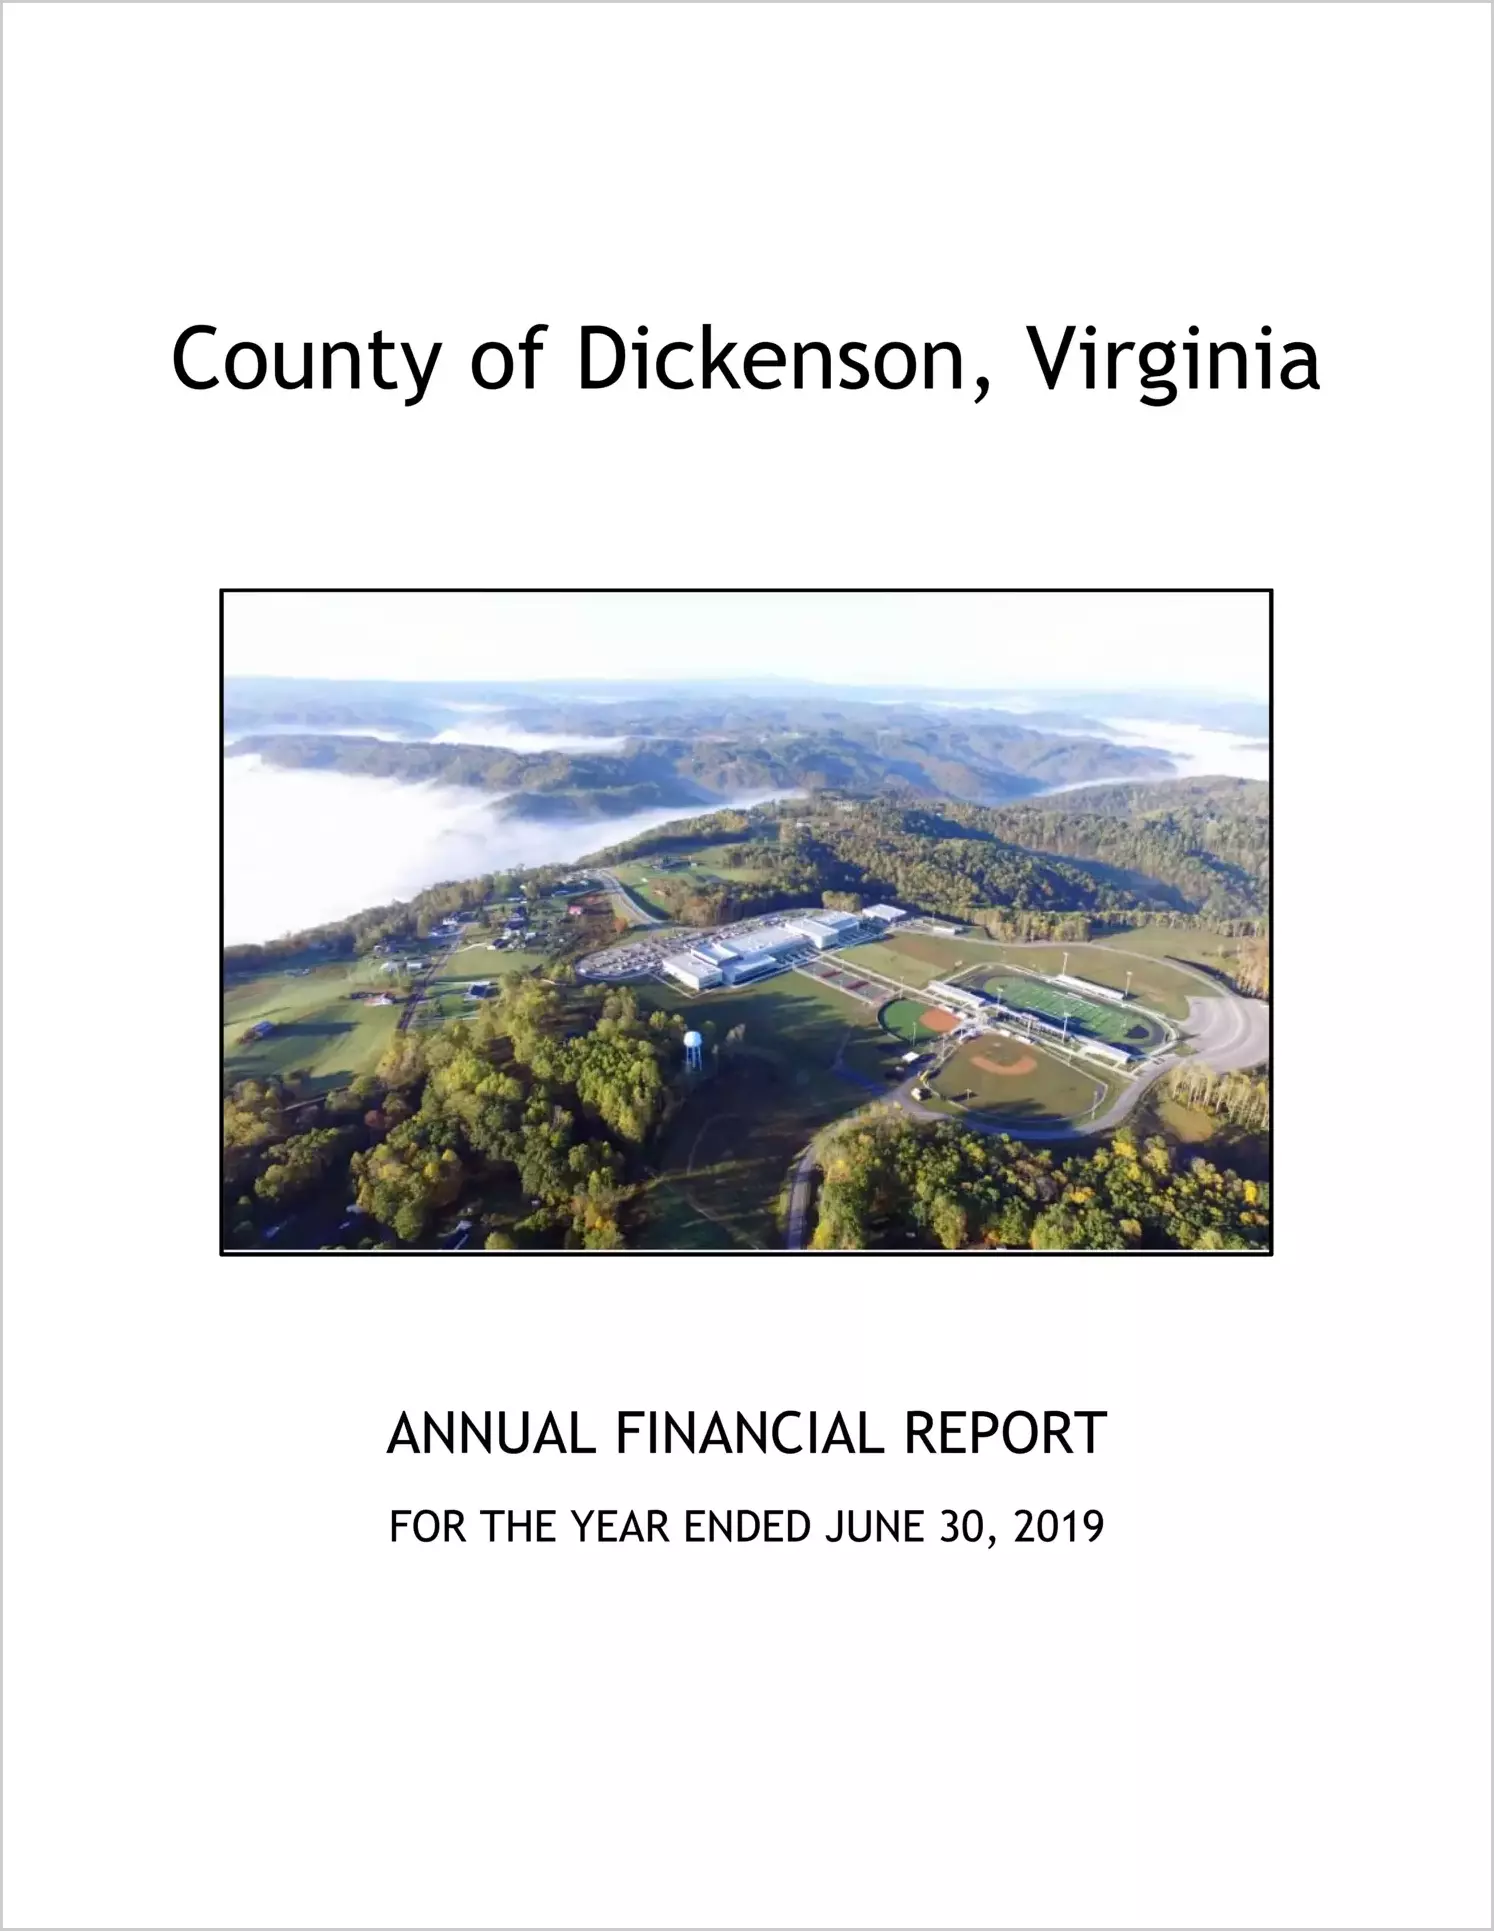 2019 Annual Financial Report for County of Dickenson